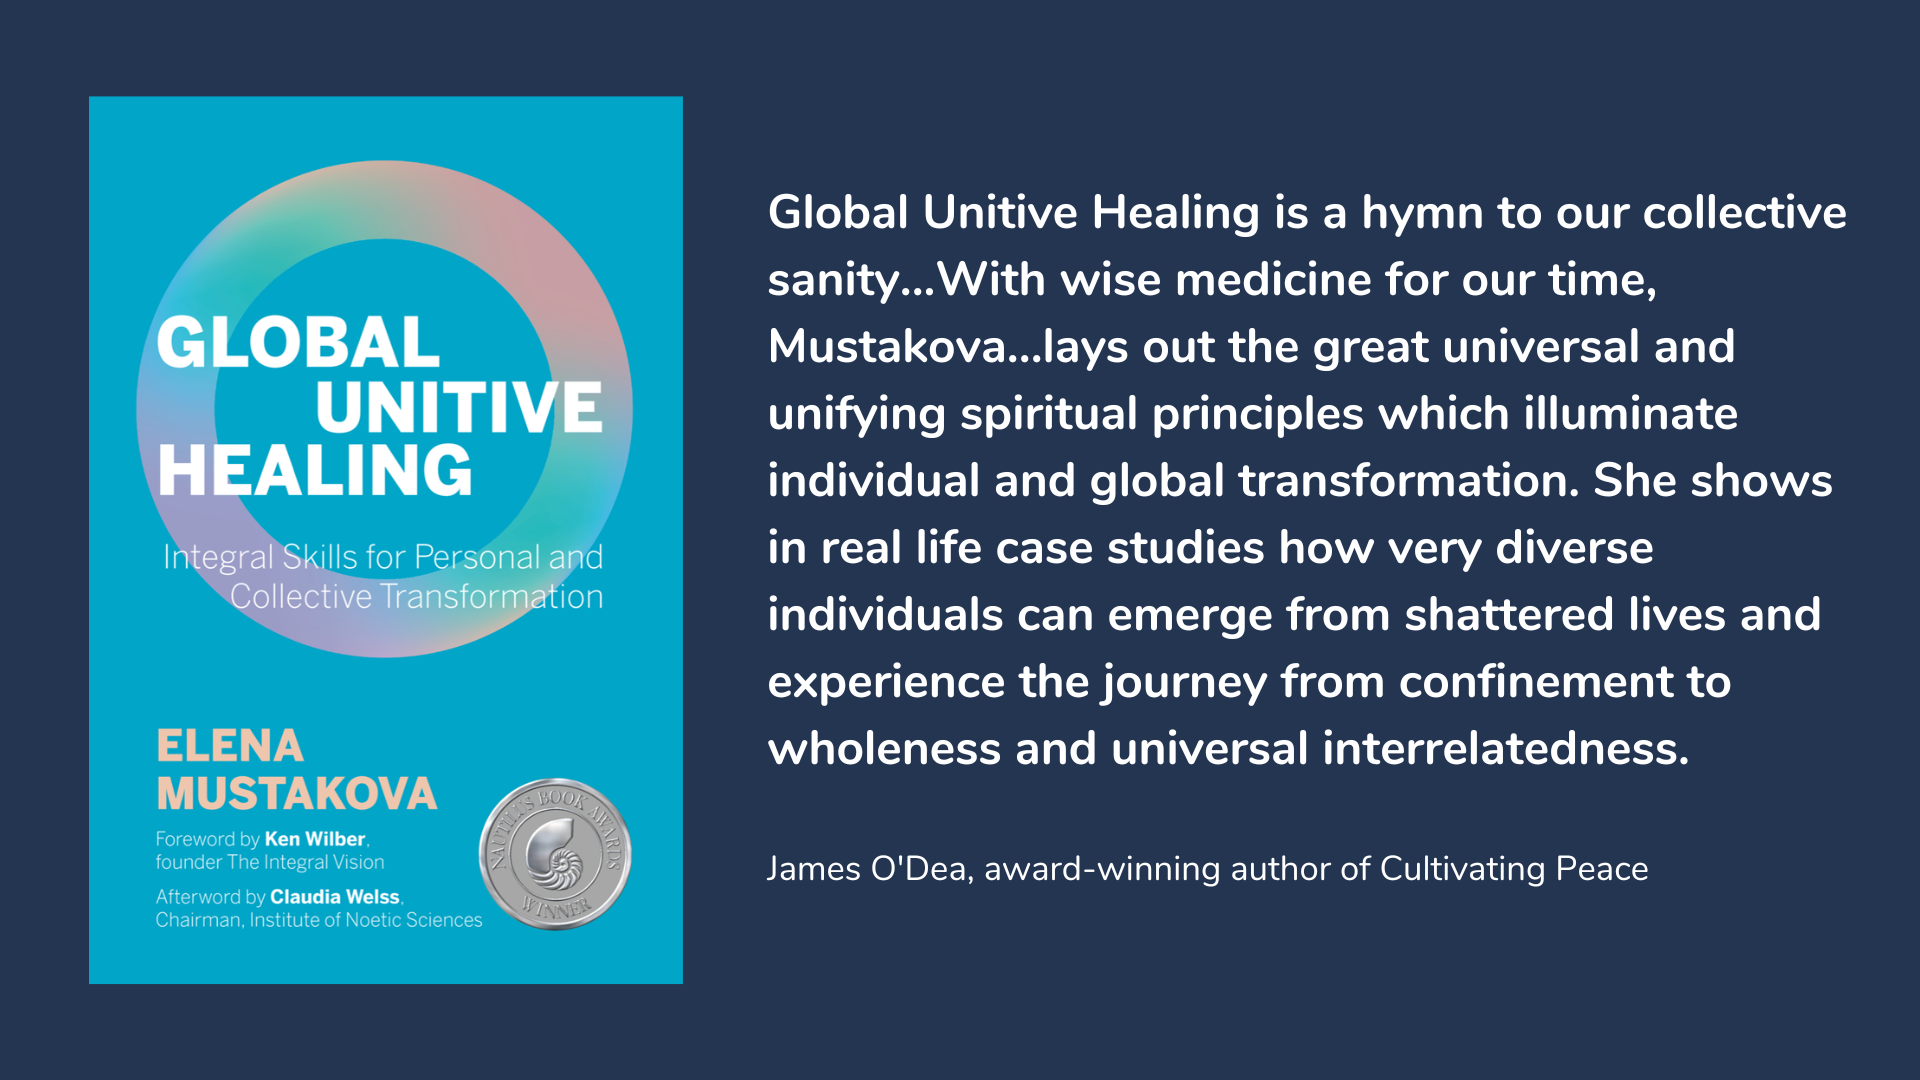 Global Unitive Healing: Integral Skills for Personal and Collective Transformation, book cover and testimonial